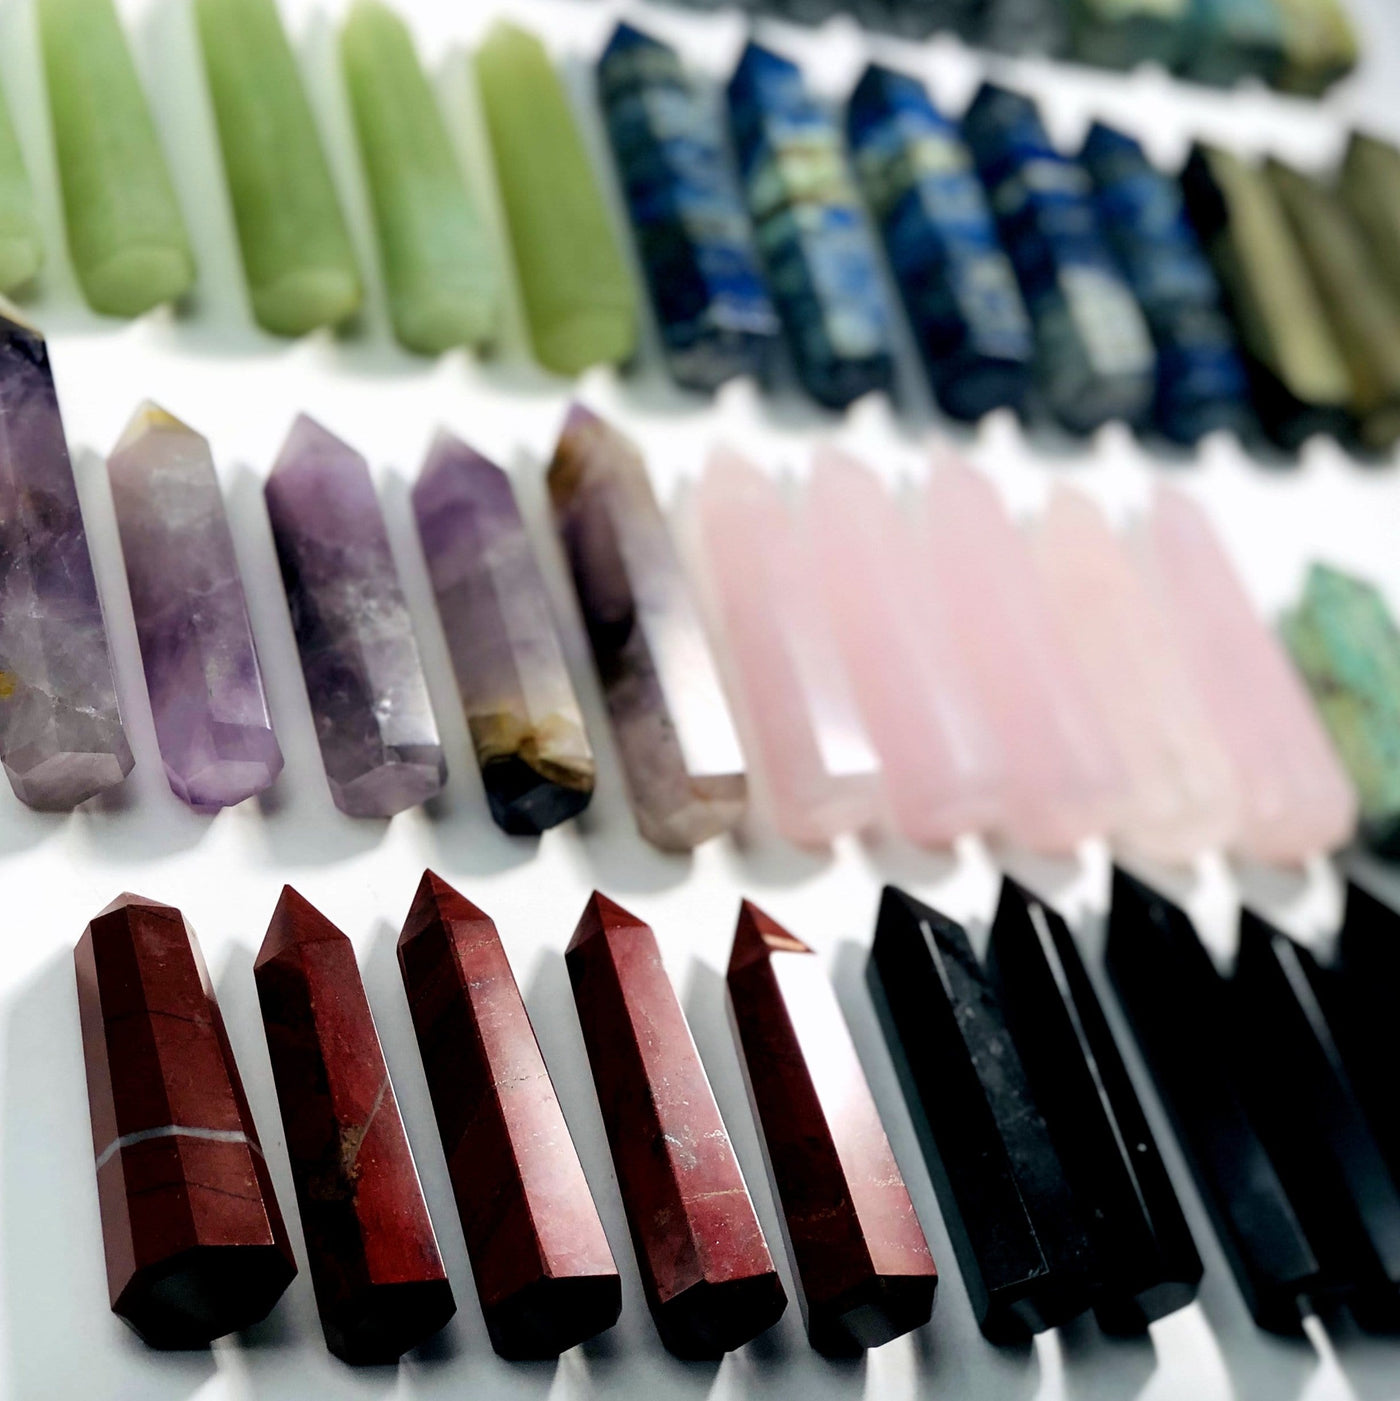 Up close view of various Gemstone Pencil Polished Points